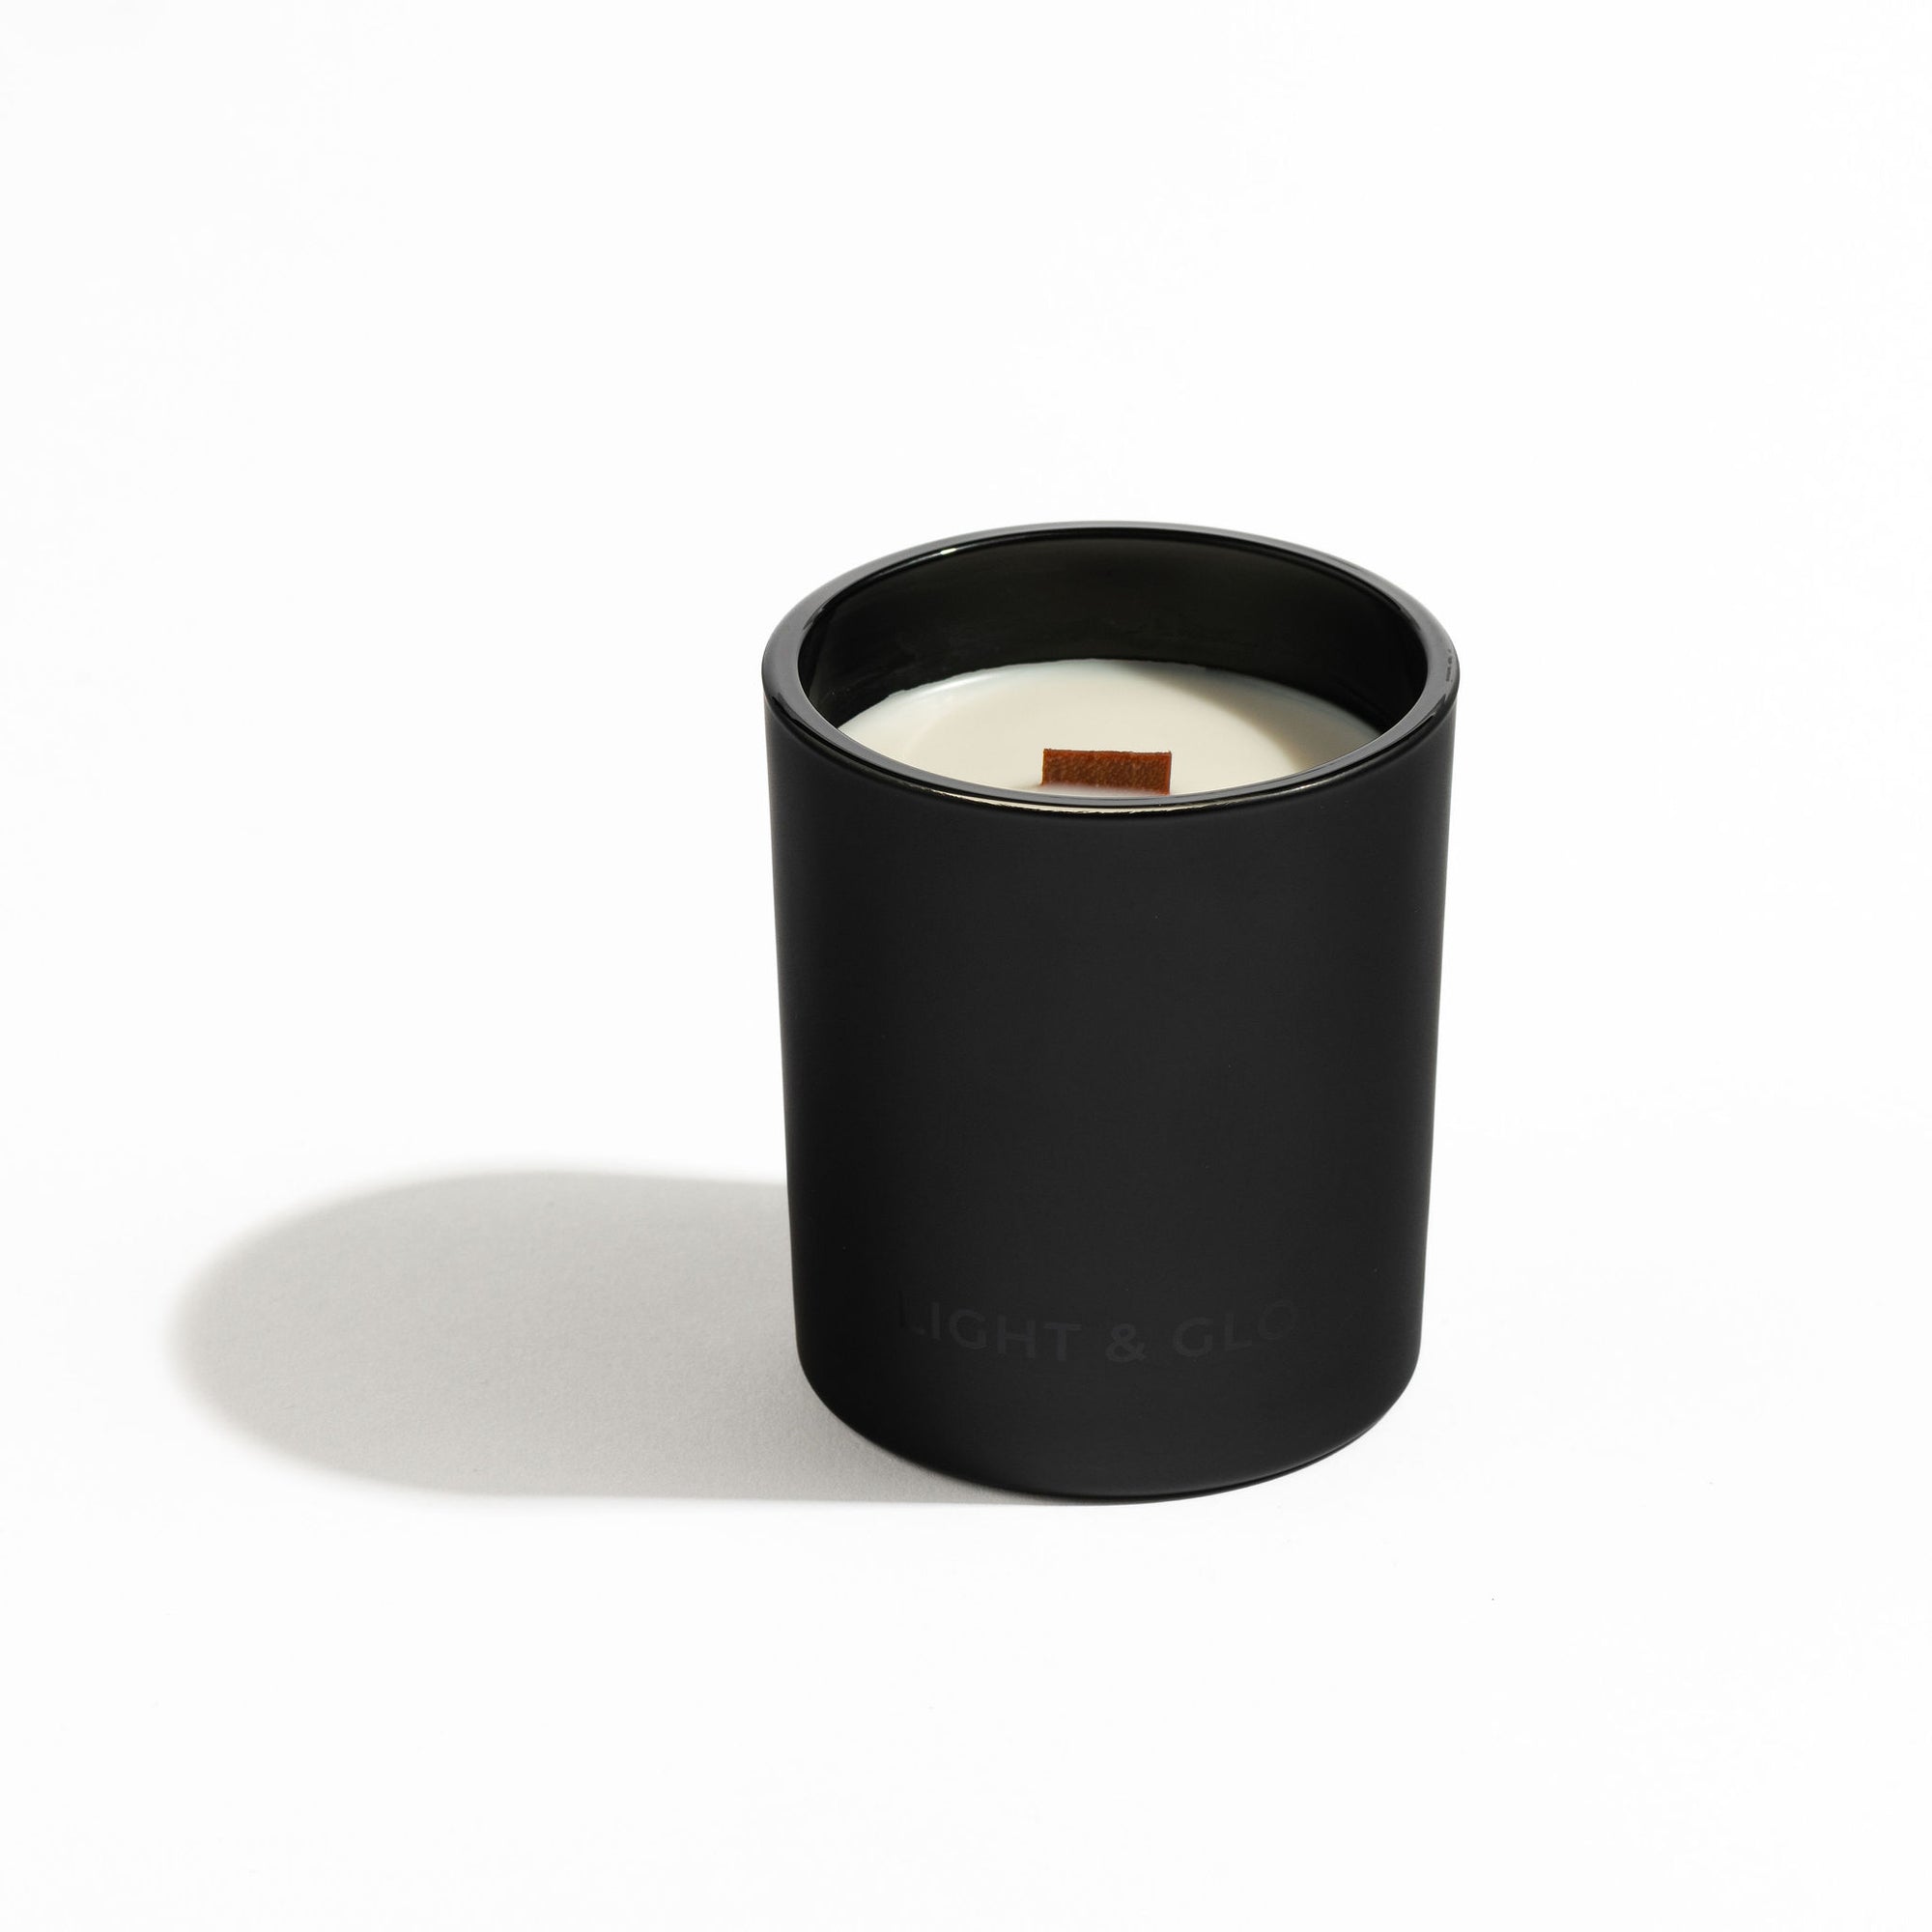 Smooth Operator - Noir Large Candle | Luxury Candles & Home Fragrances by Light + Glo